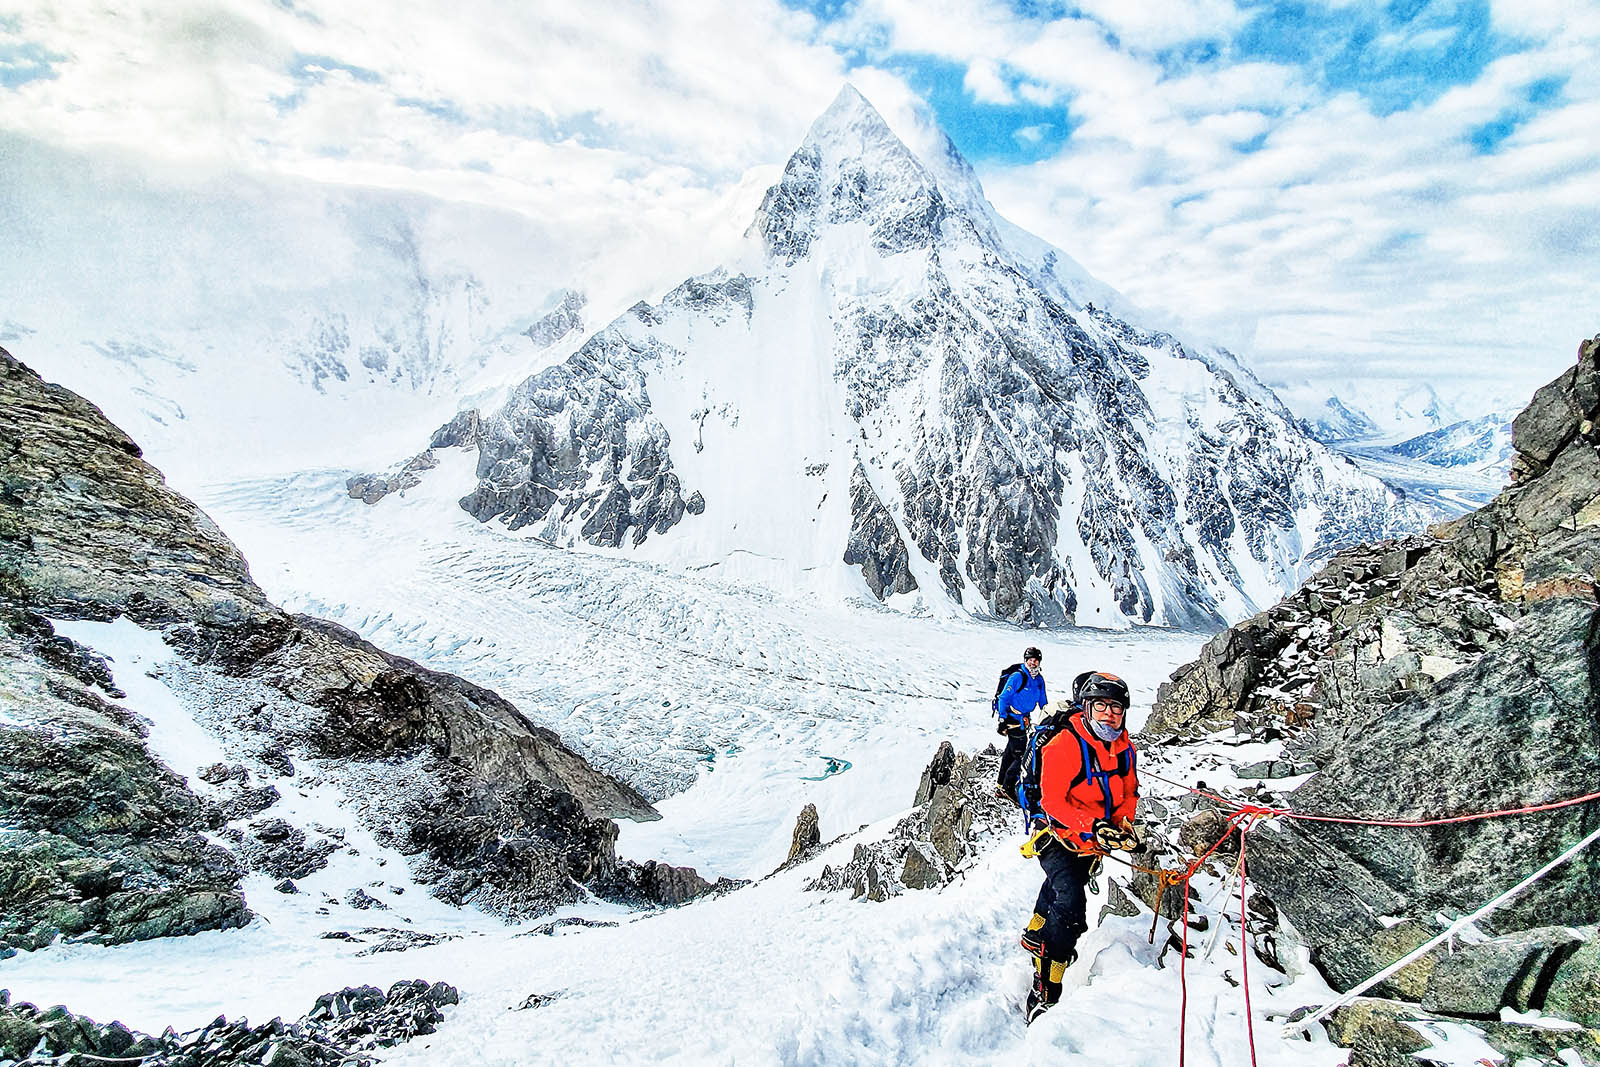 Do You Know a Little Bit About Everything When It Comes to Geography? K2 Mountain